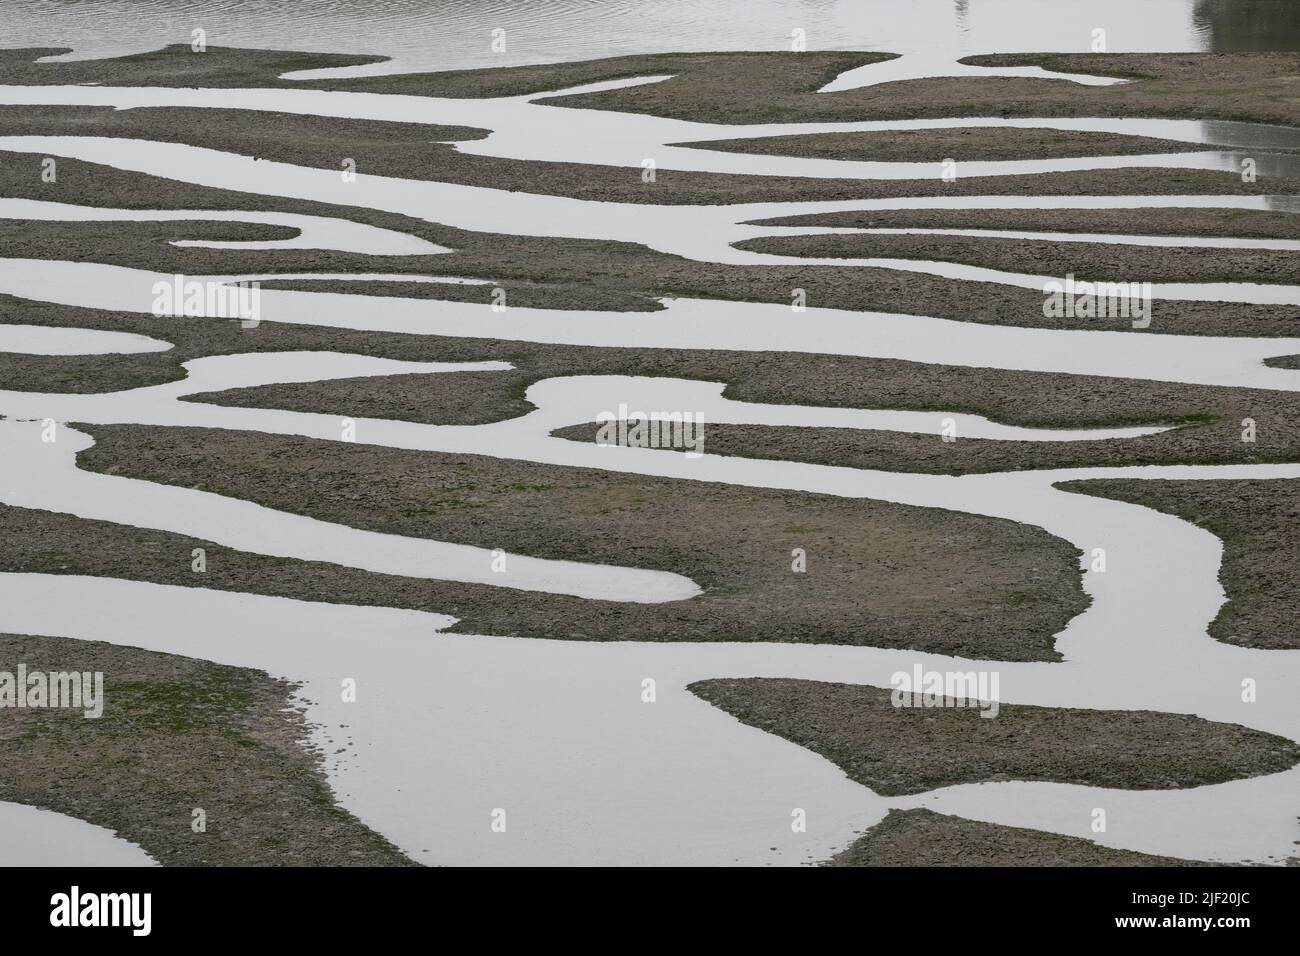 The natural patterns of a mudflat and water paths at low tide in Point Reyes National seashore in California. Stock Photo